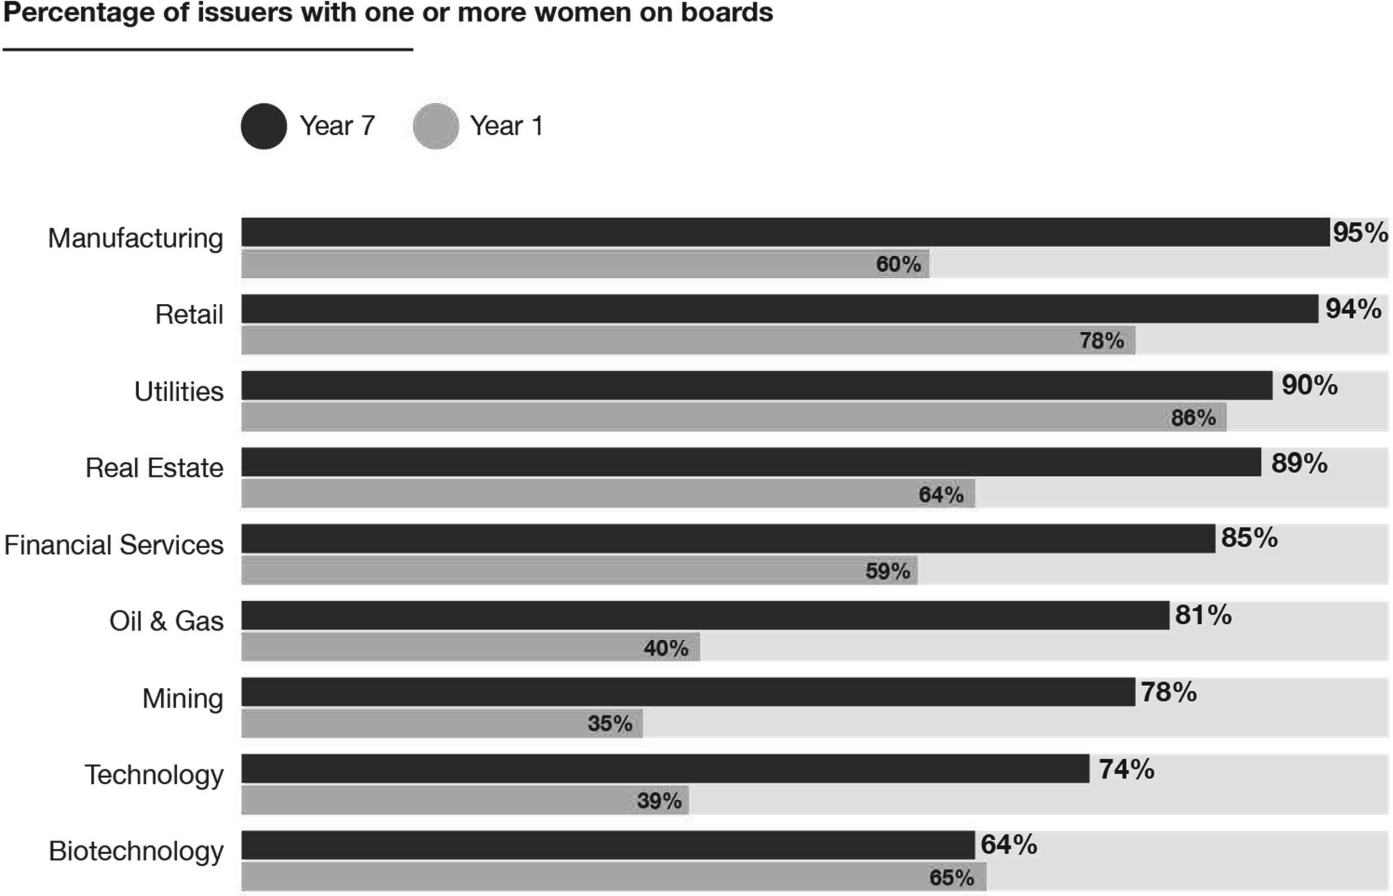 Percentage of issuers with one or more women on boards